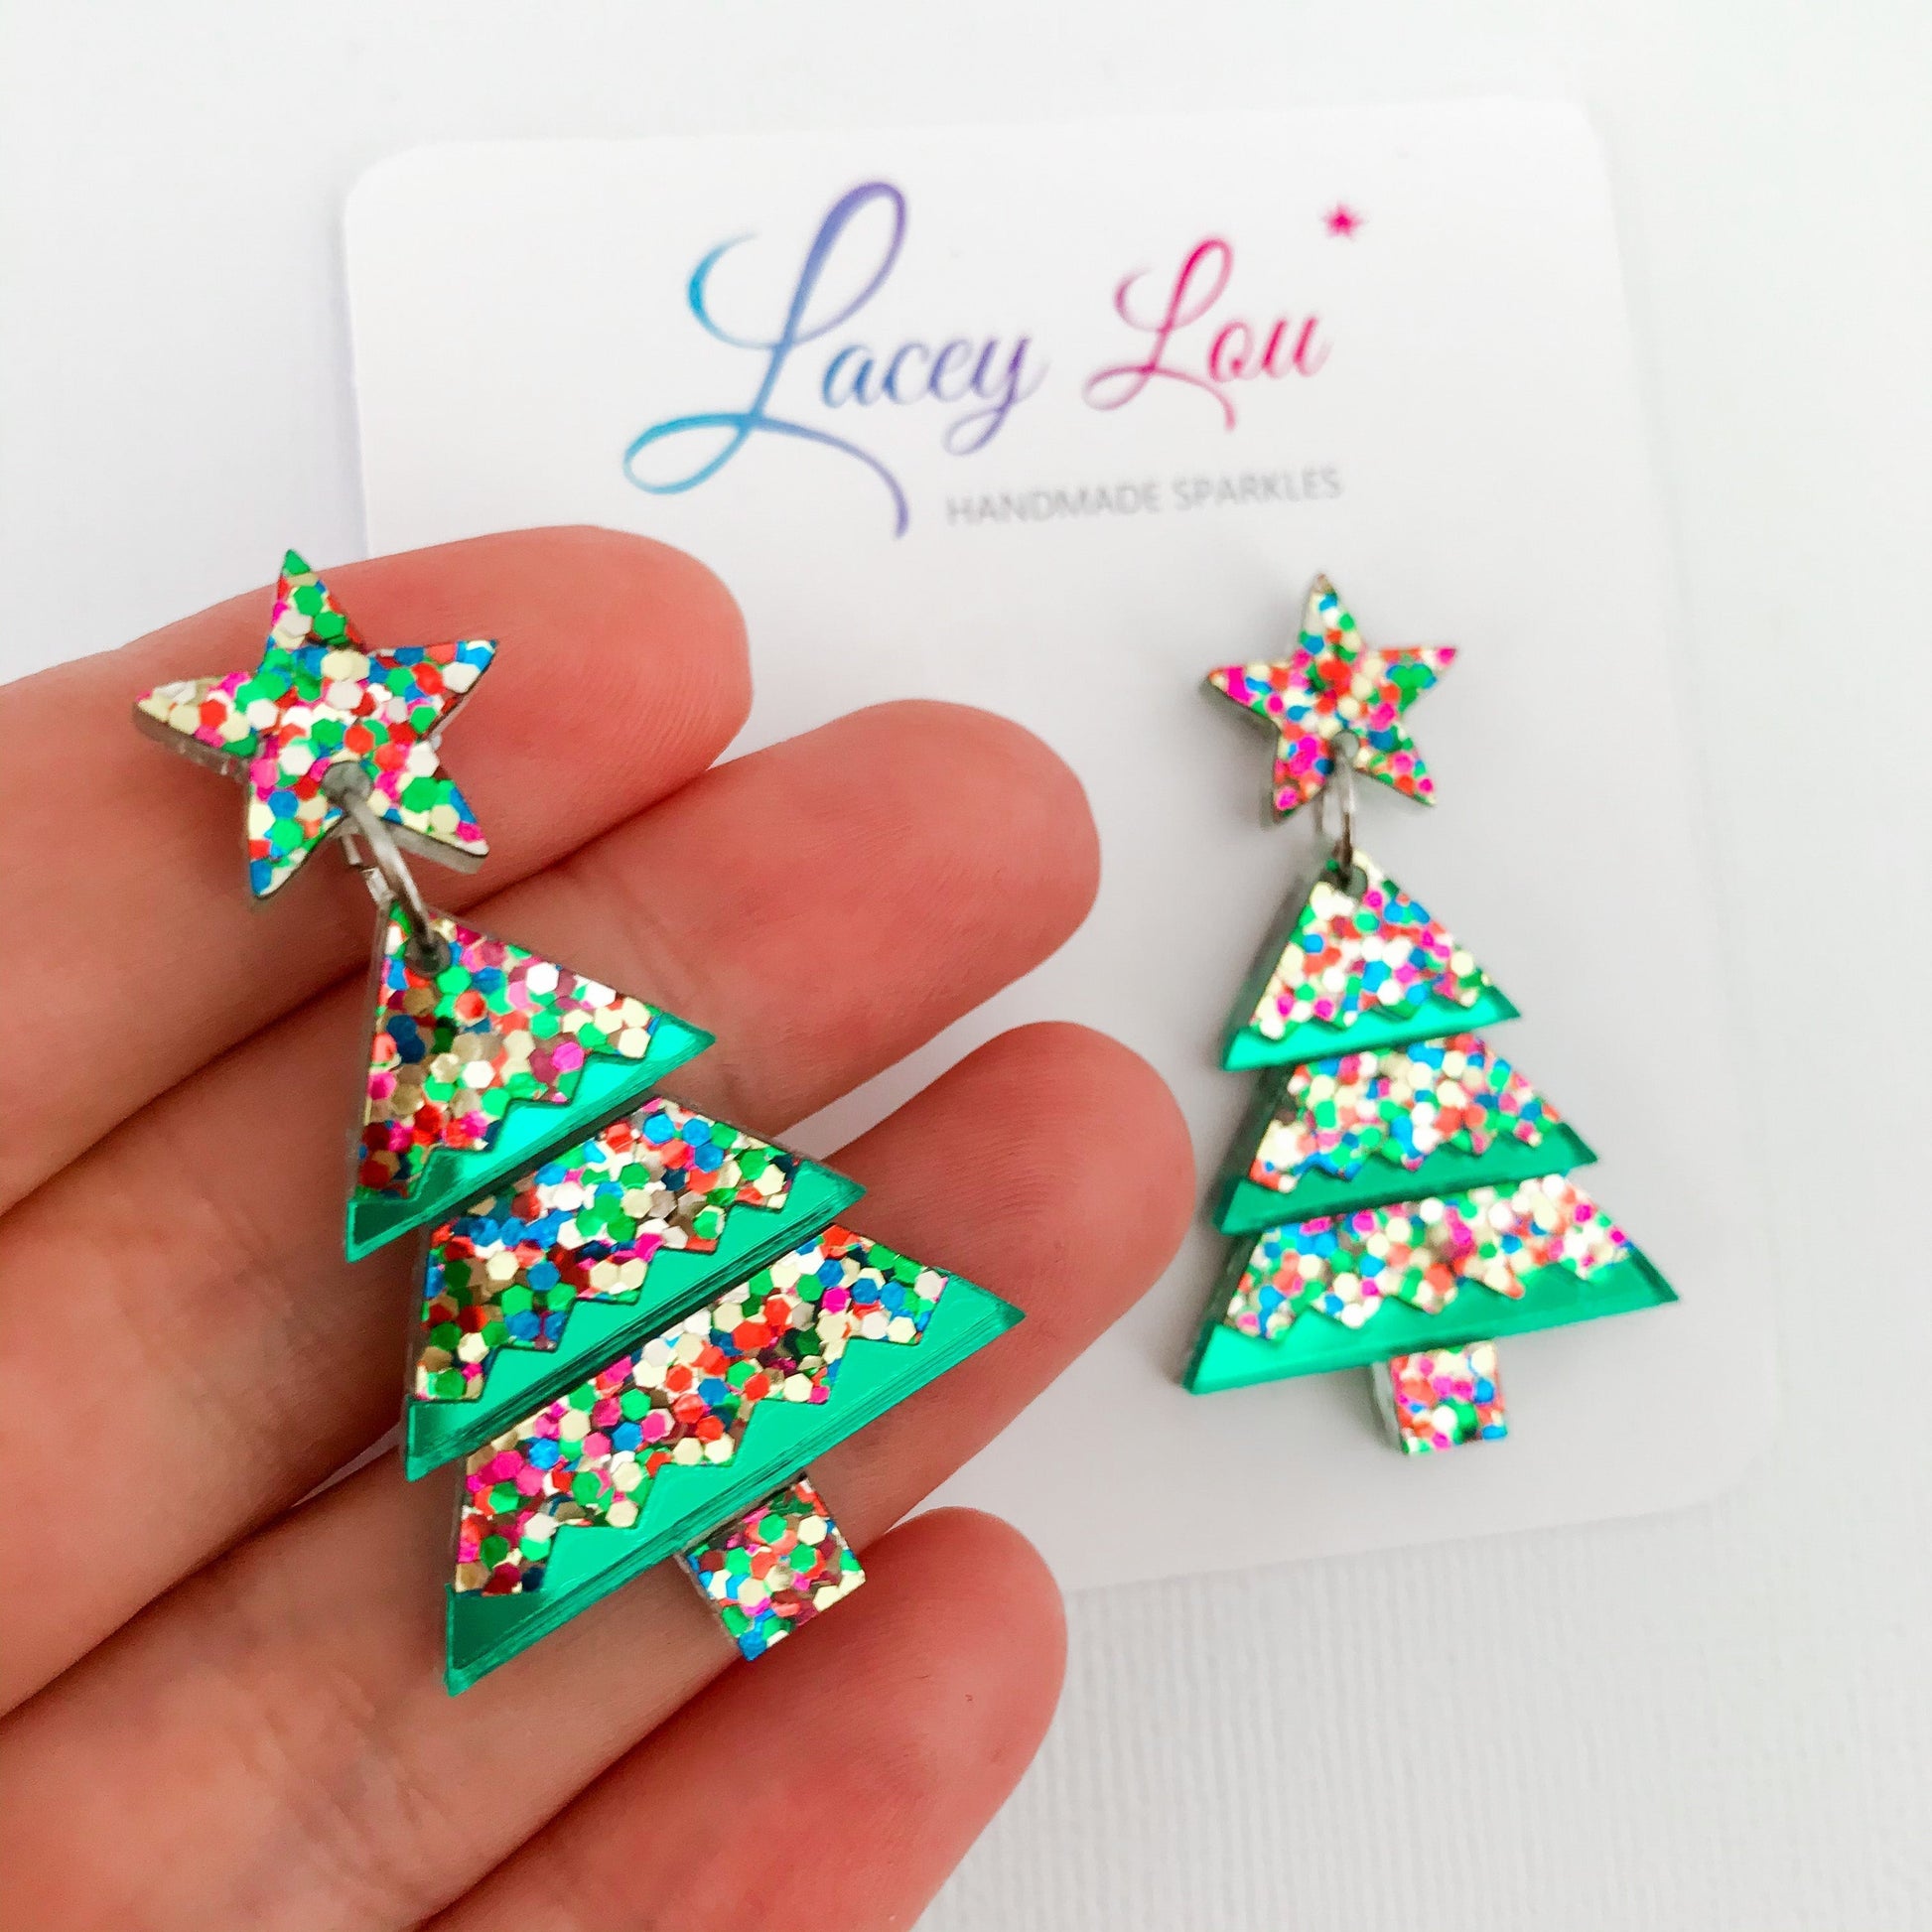 Tiered Confetti Glitter Christmas Tree Dangle Earrings - Lacey Lou Sparkles